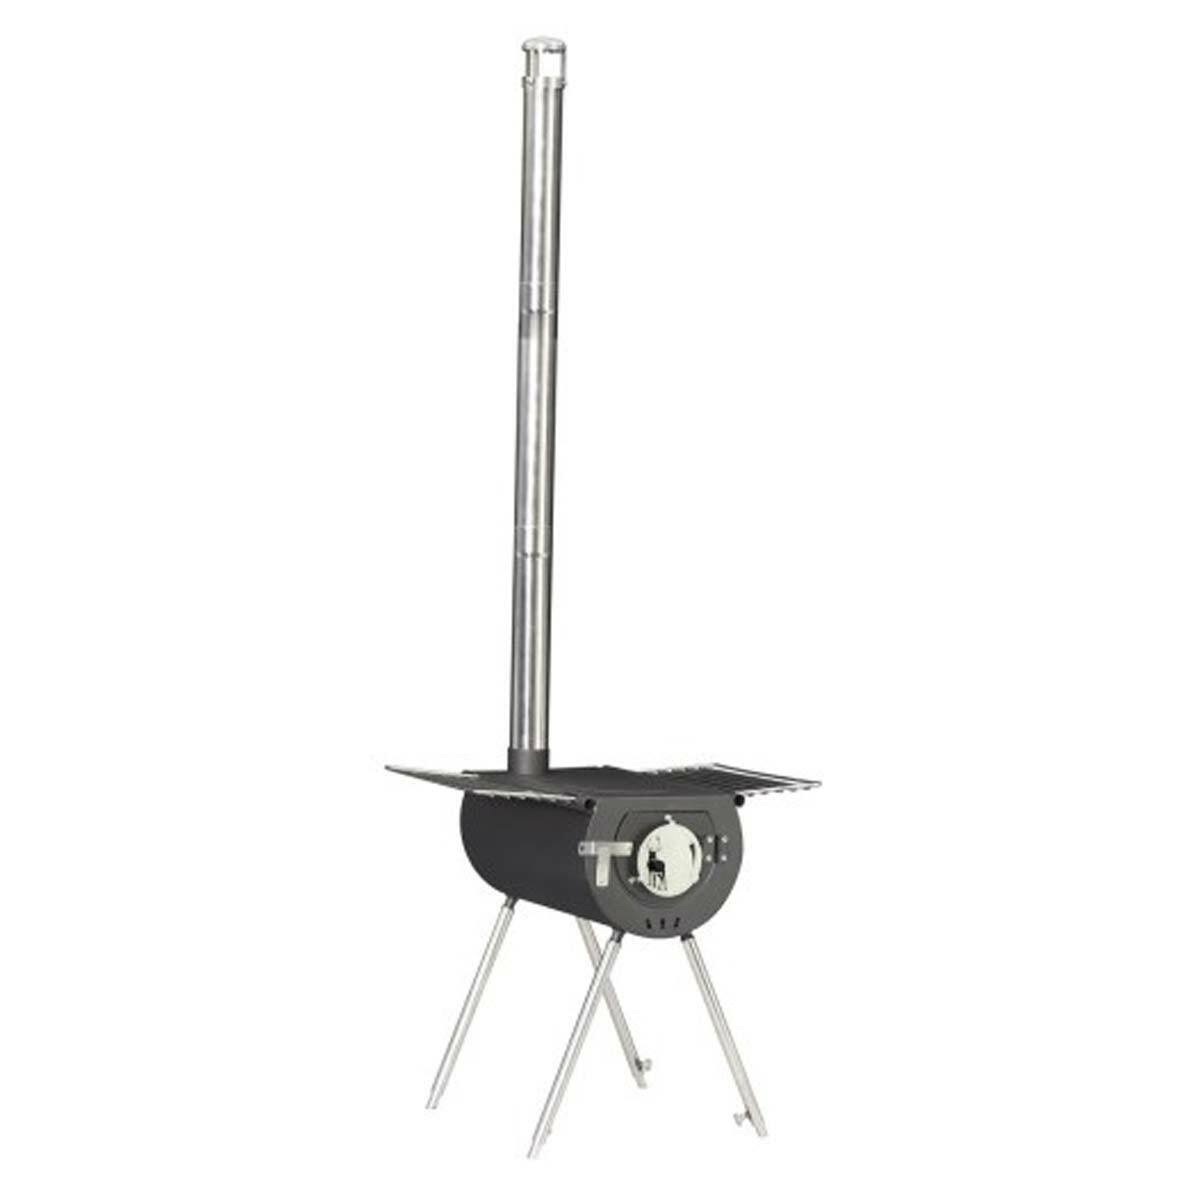 US Stove Ccs14 Caribou Backpacker Camp Stove - 14 inch, Black